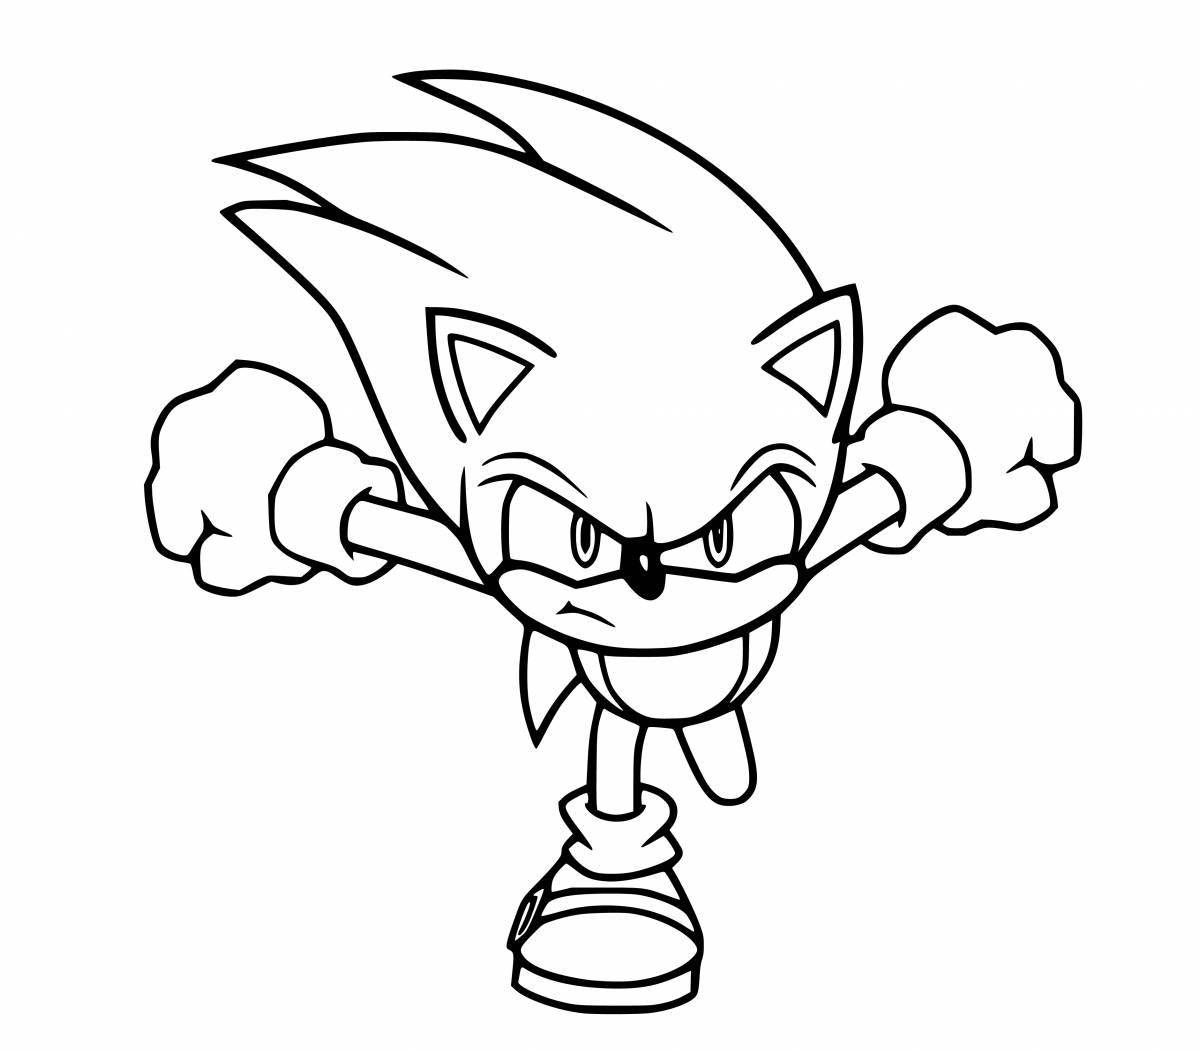 Excalibur sonic awesome coloring page